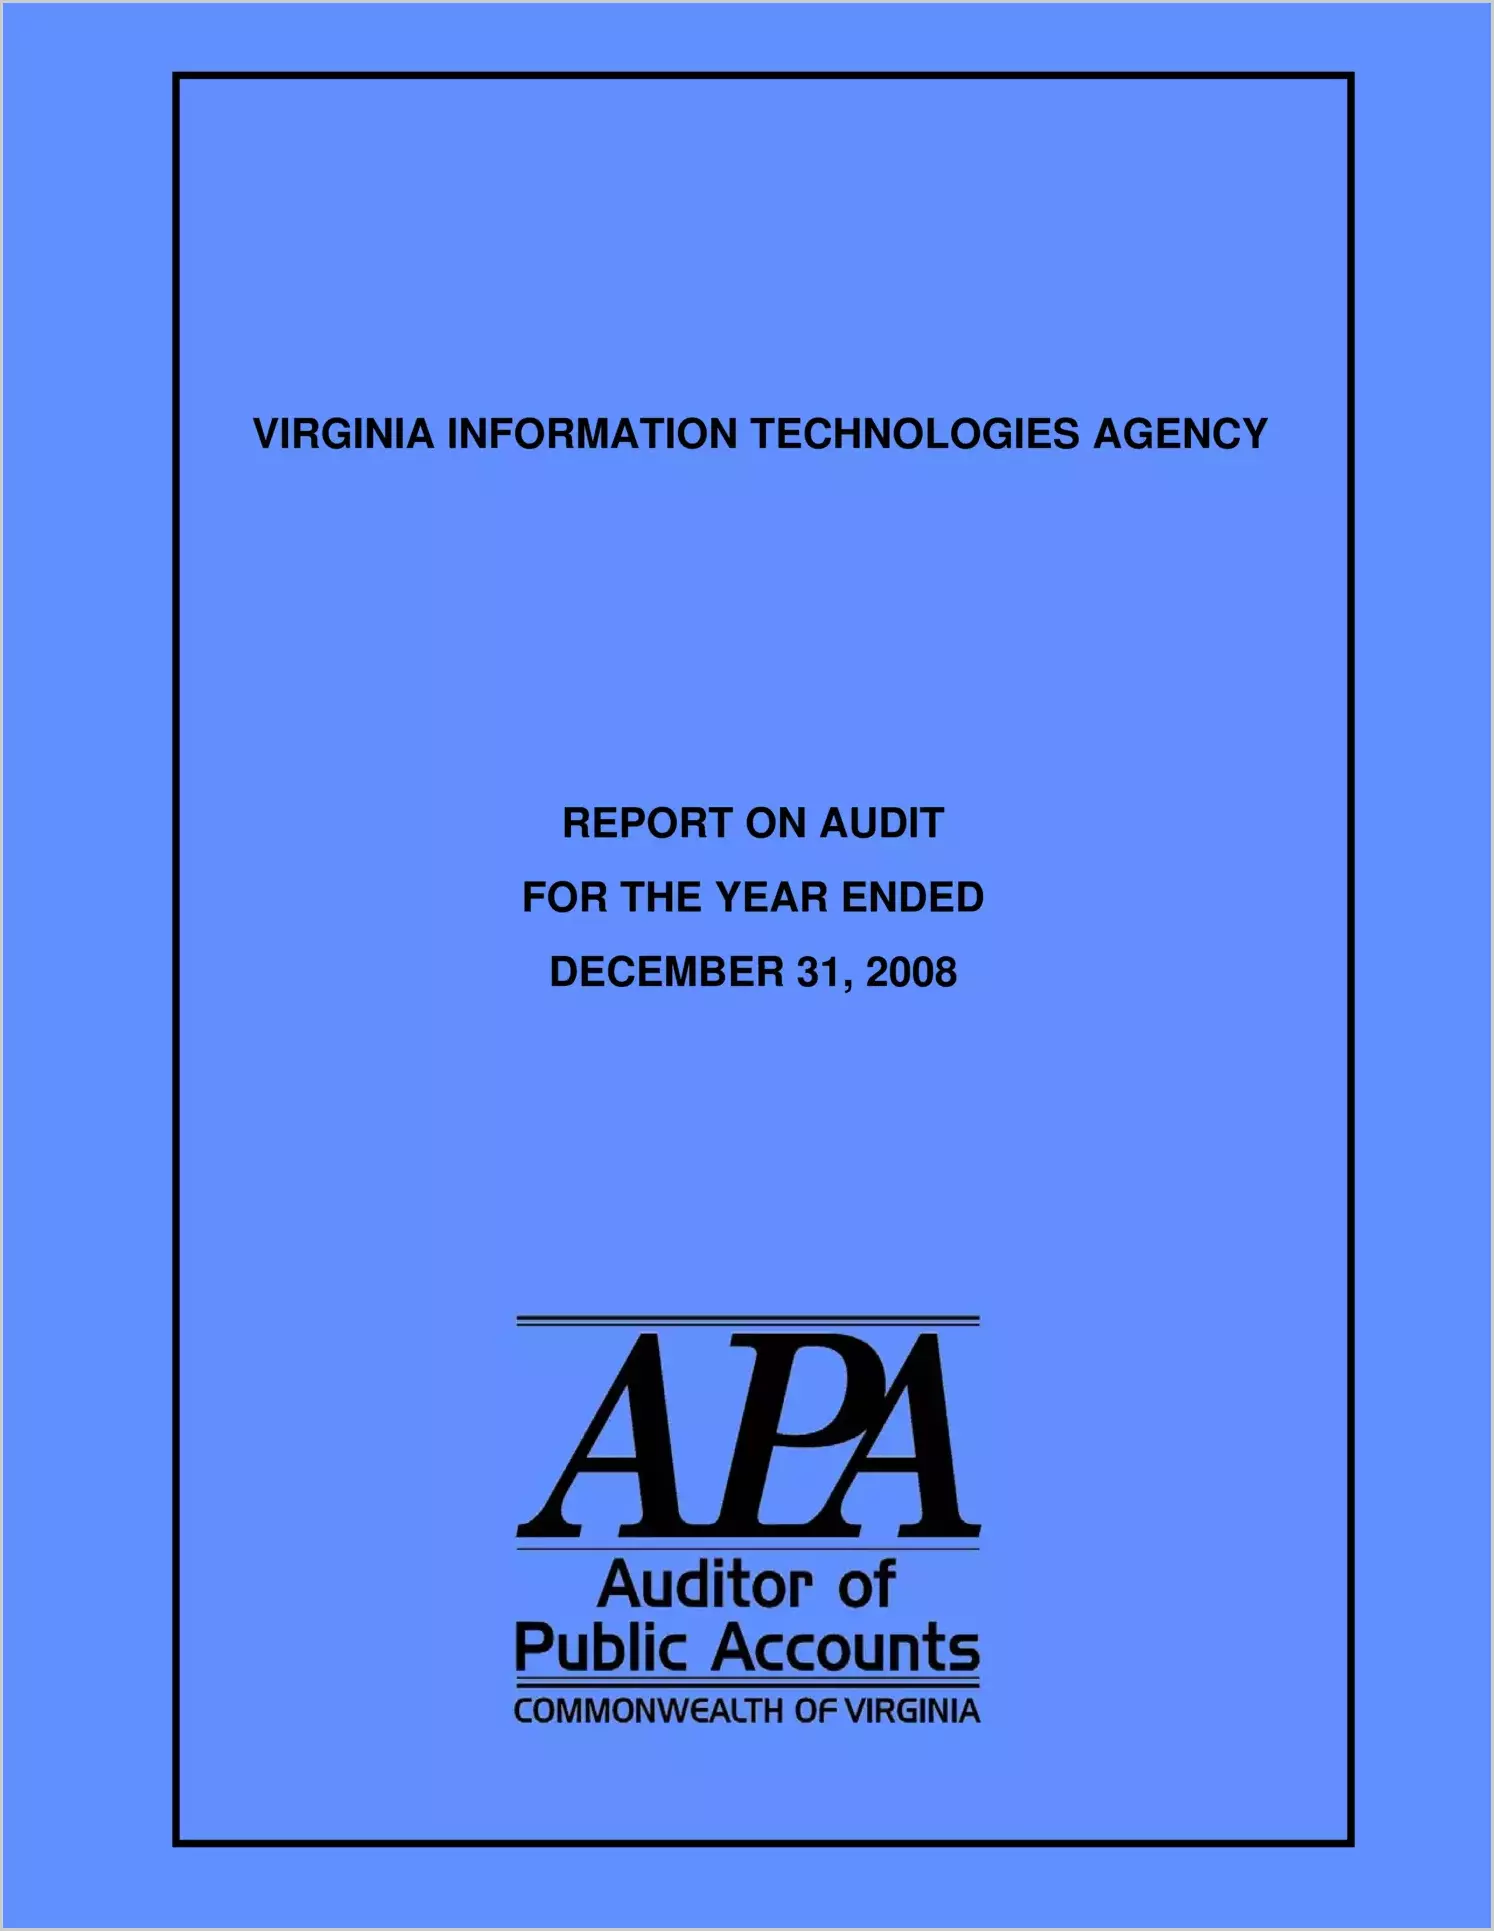 Virginia Information Technologies Agency for the yeare ended December 31, 2008